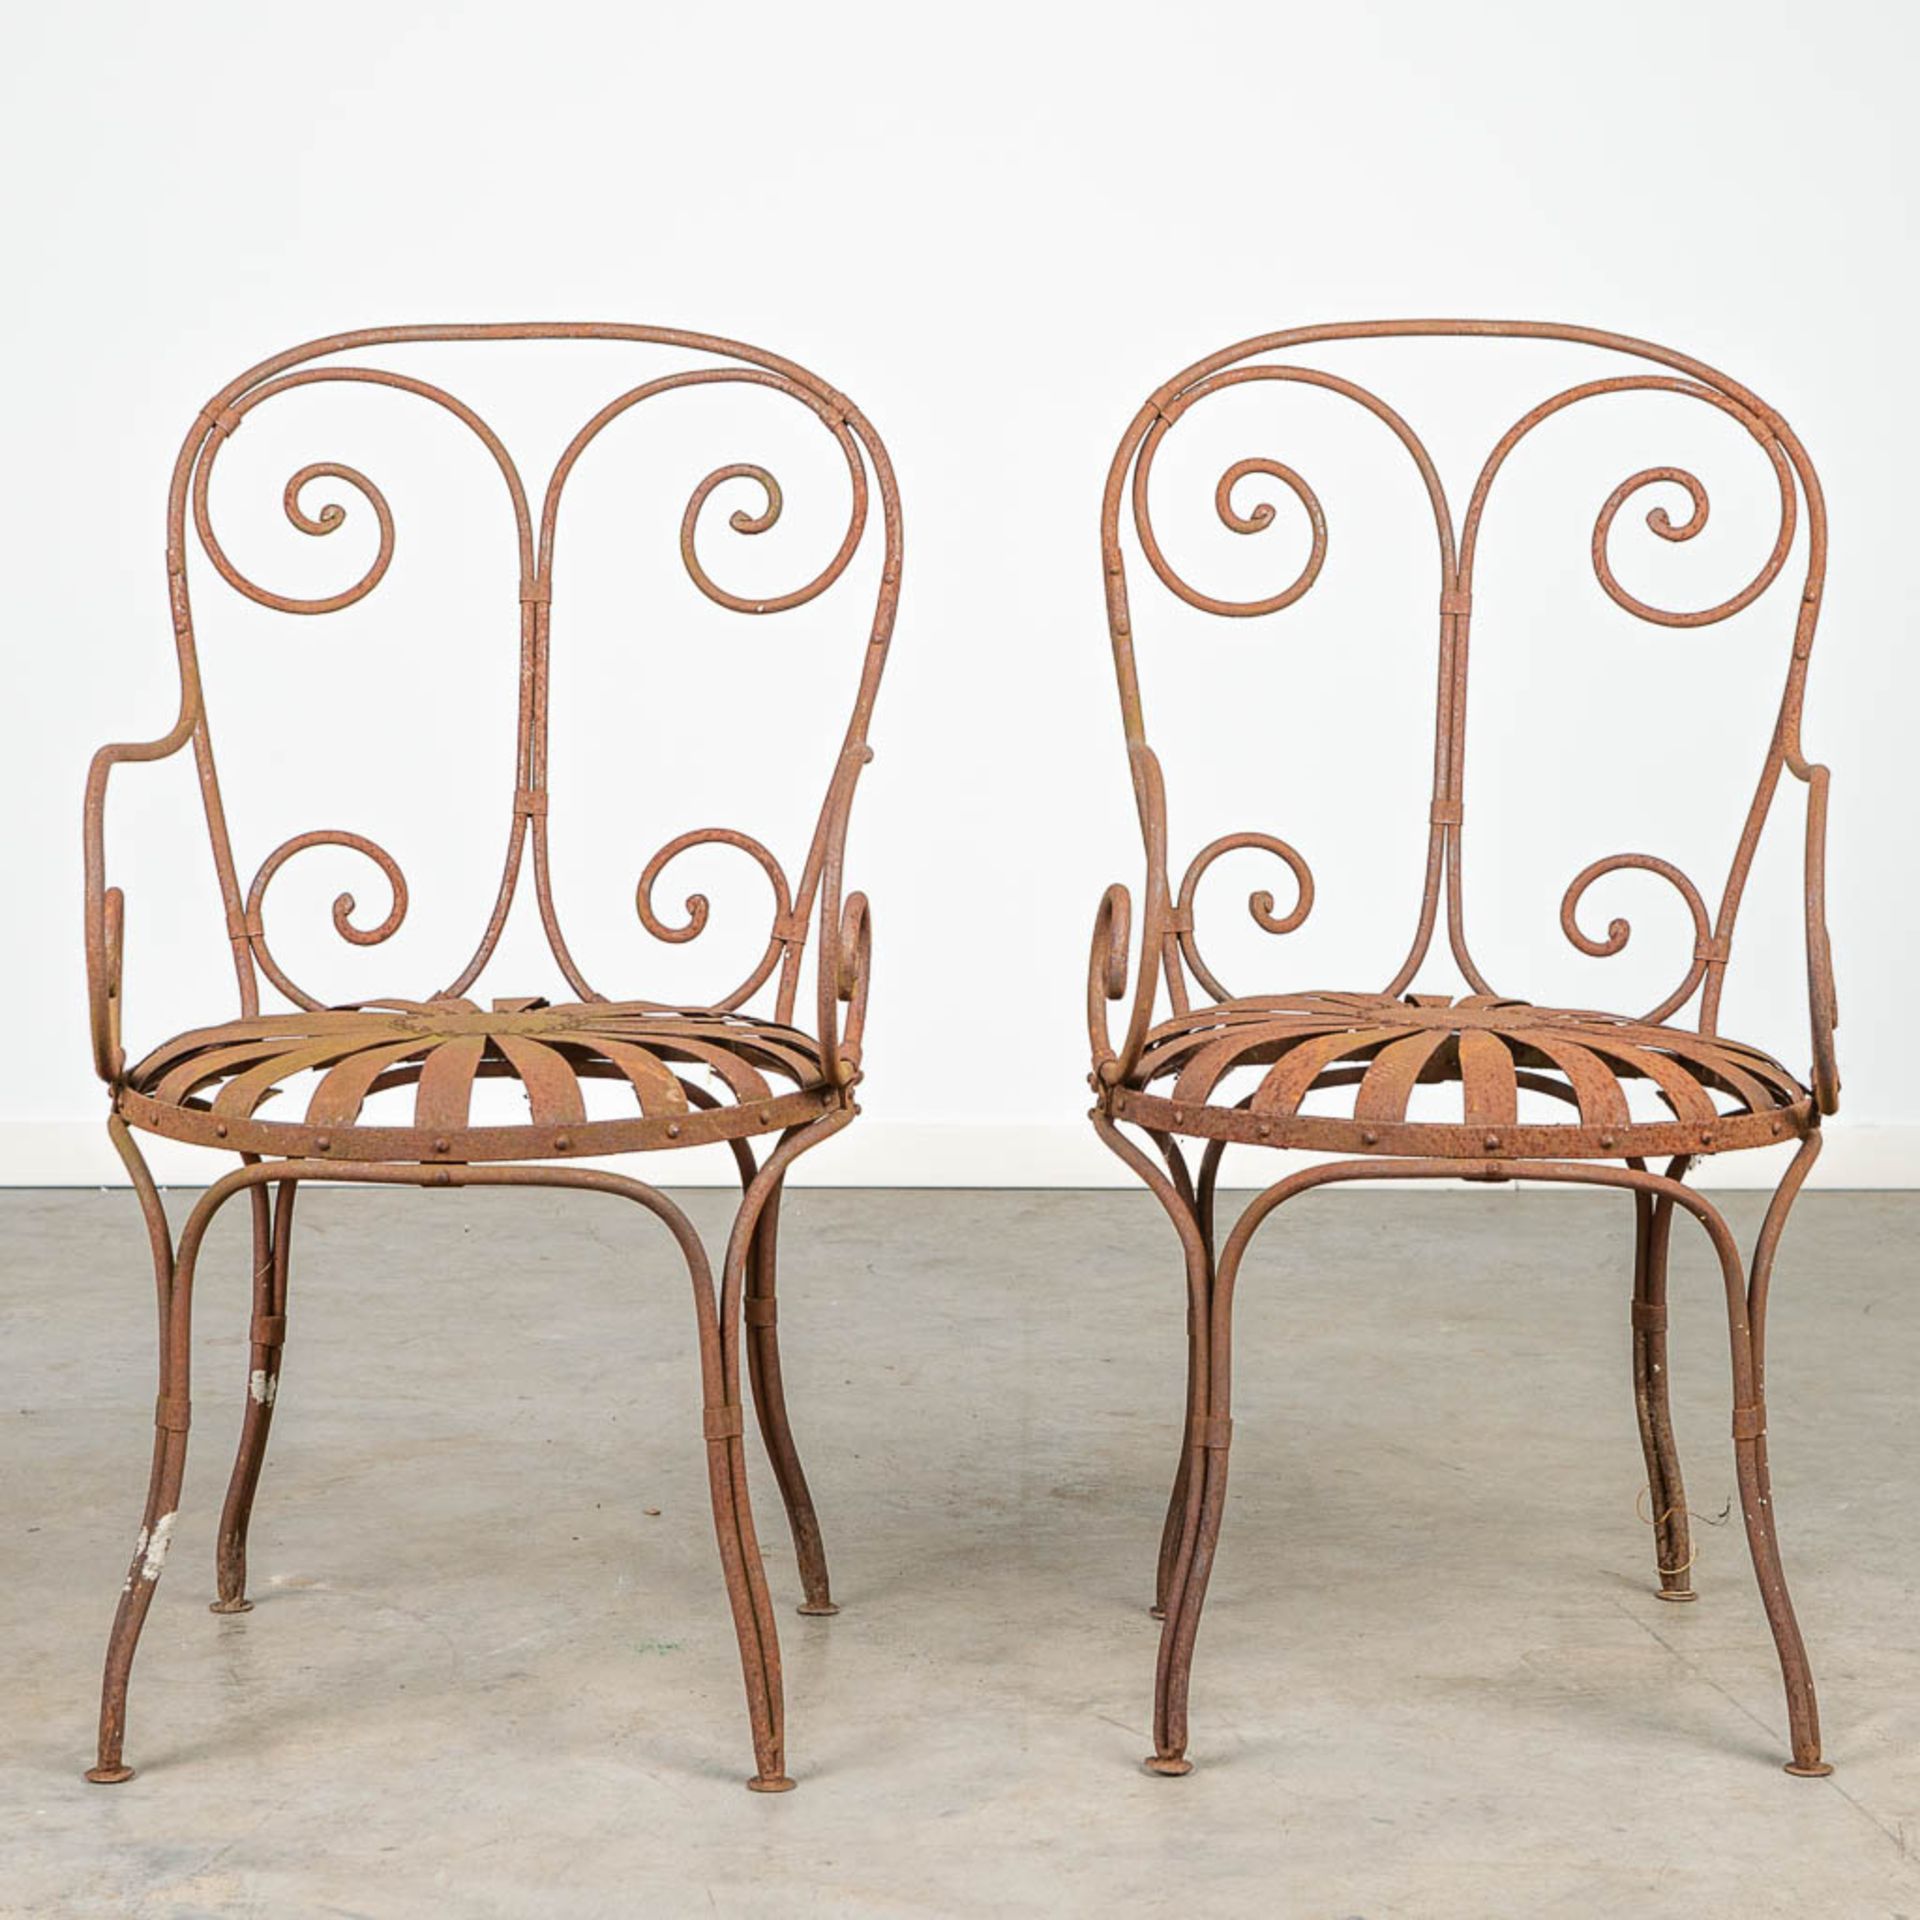 A pair of garden chairs made of wrought iron. - Image 6 of 6